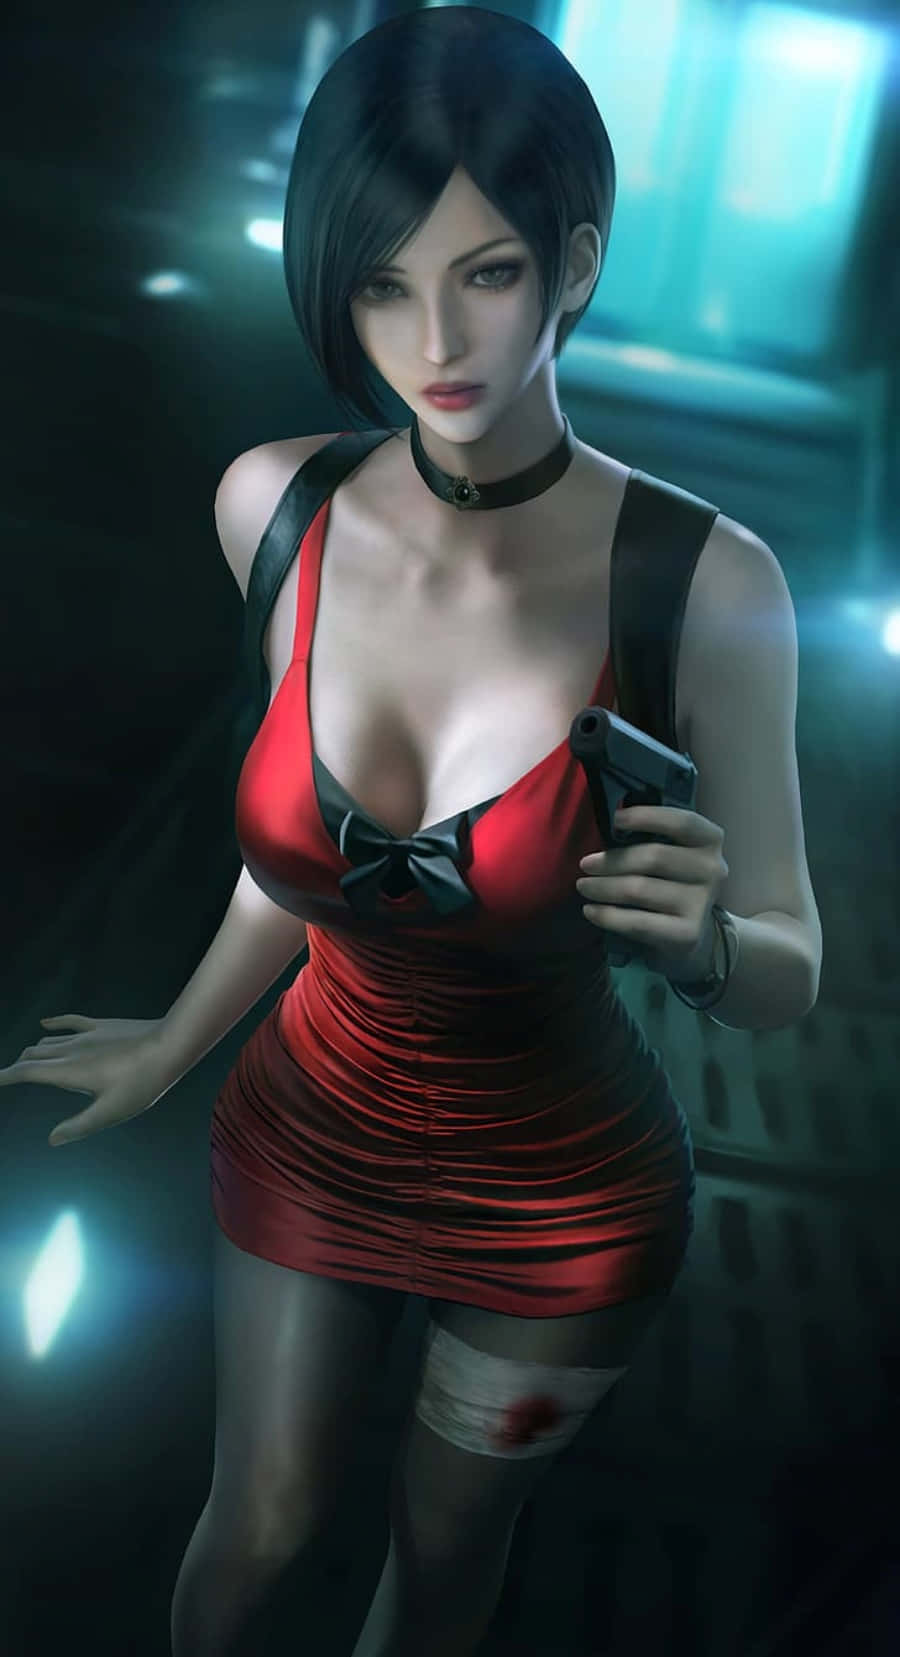 Ada Wong In Sophisticated Attire, Ready For Action Wallpaper